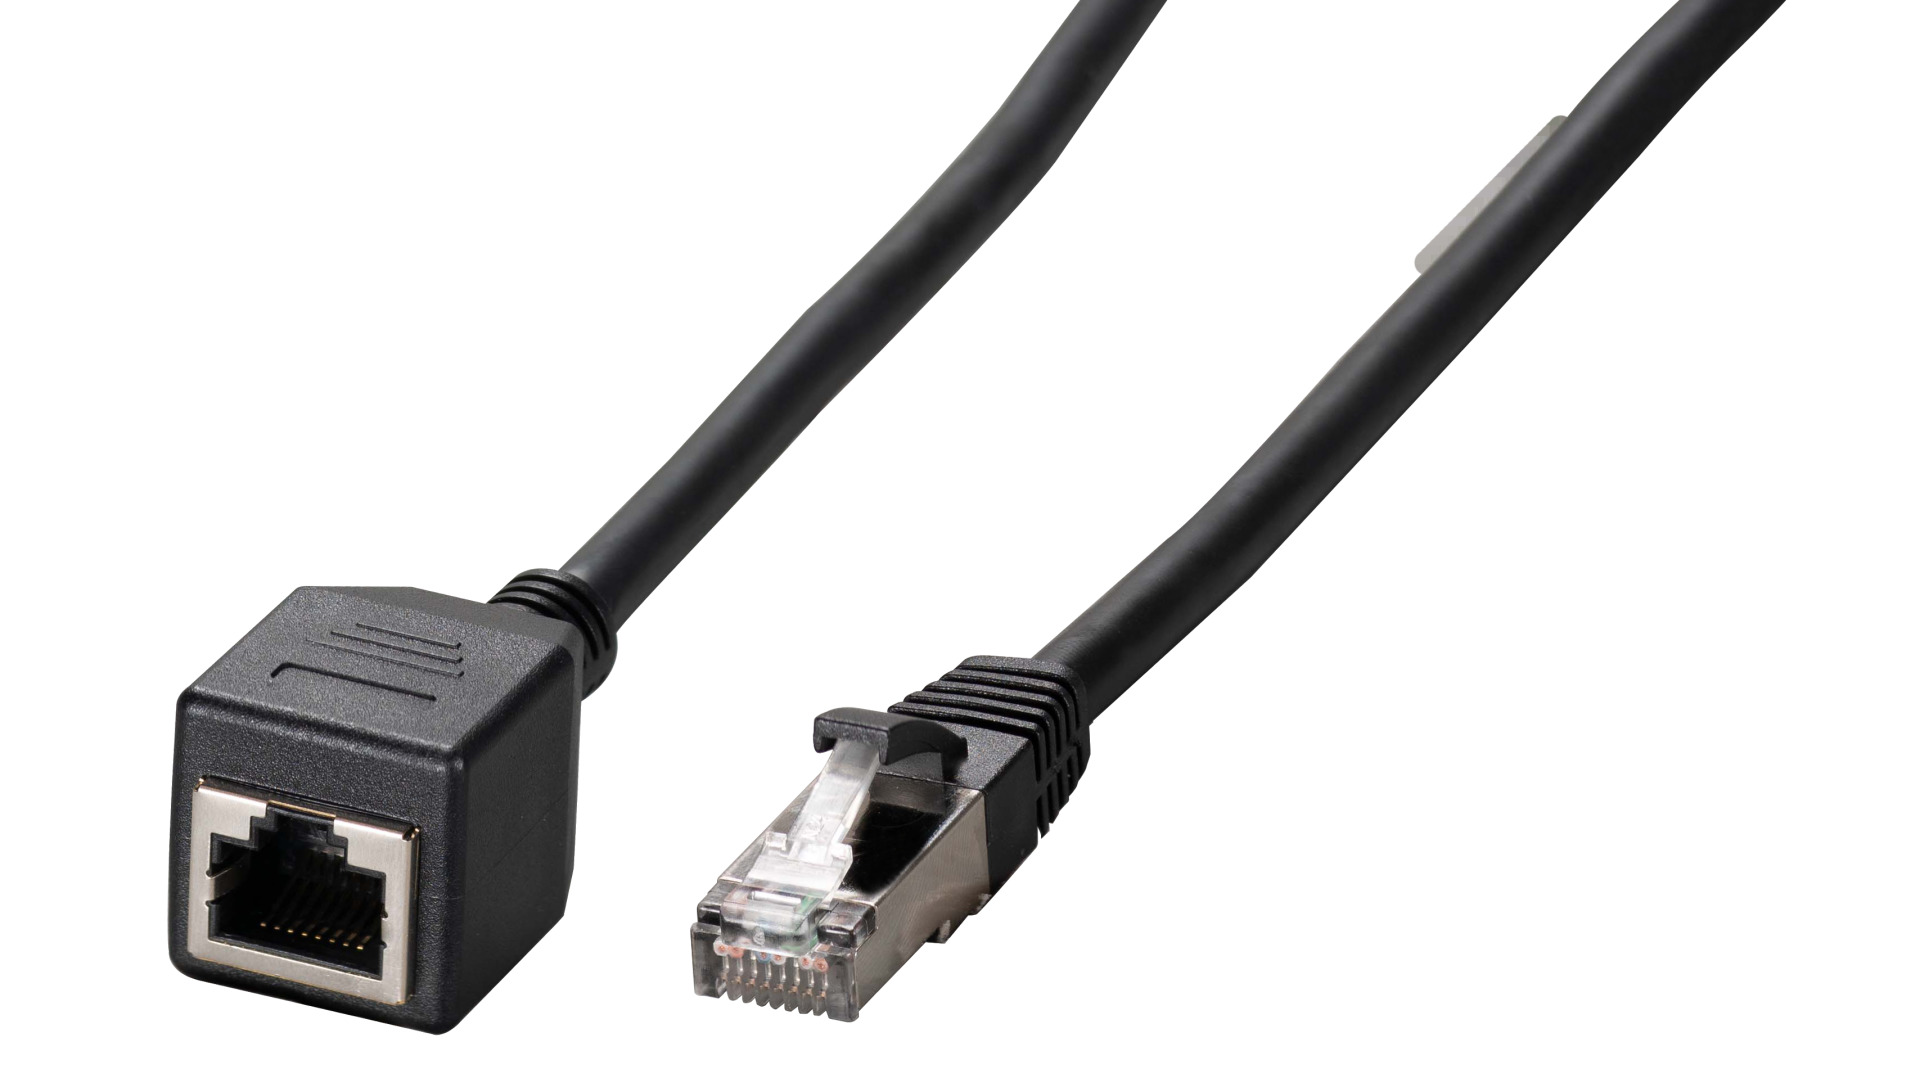 RJ45 patch cable extension Cat.6A, S/FTP, AWG26, black, 1m